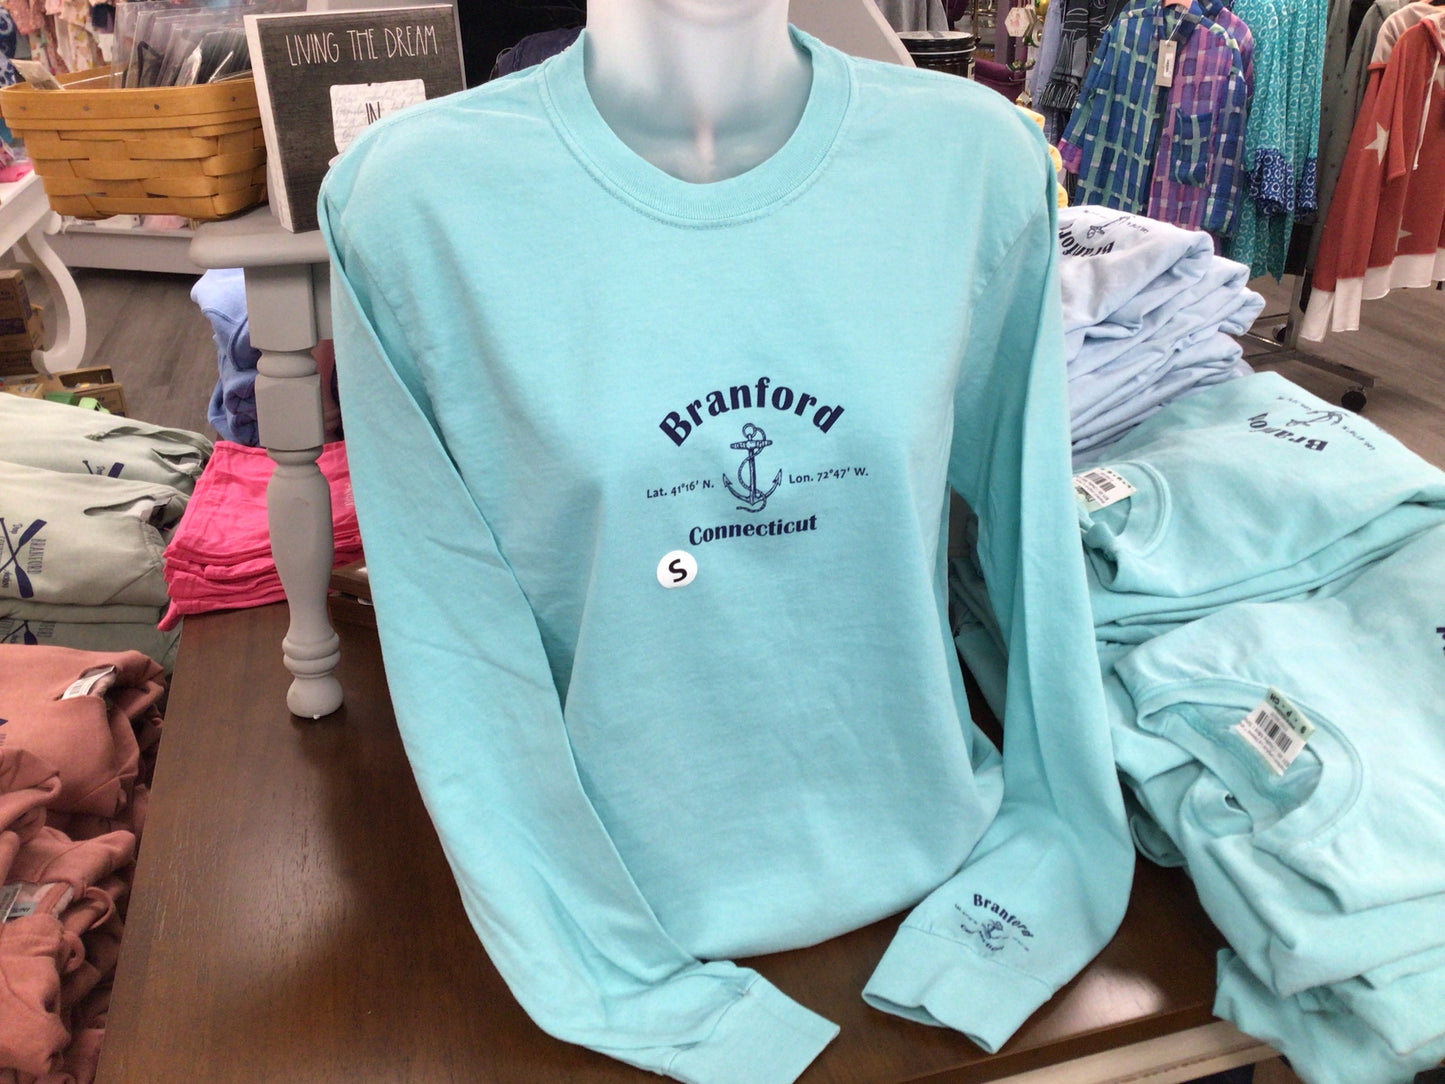 Branford Long Sleeve Longitude and Latitude Tee Shirts 100% Comfort blue color T-shirt. Soft and cozy for a cool breezy evening or just throw over your bathing suit as a beach coverup.